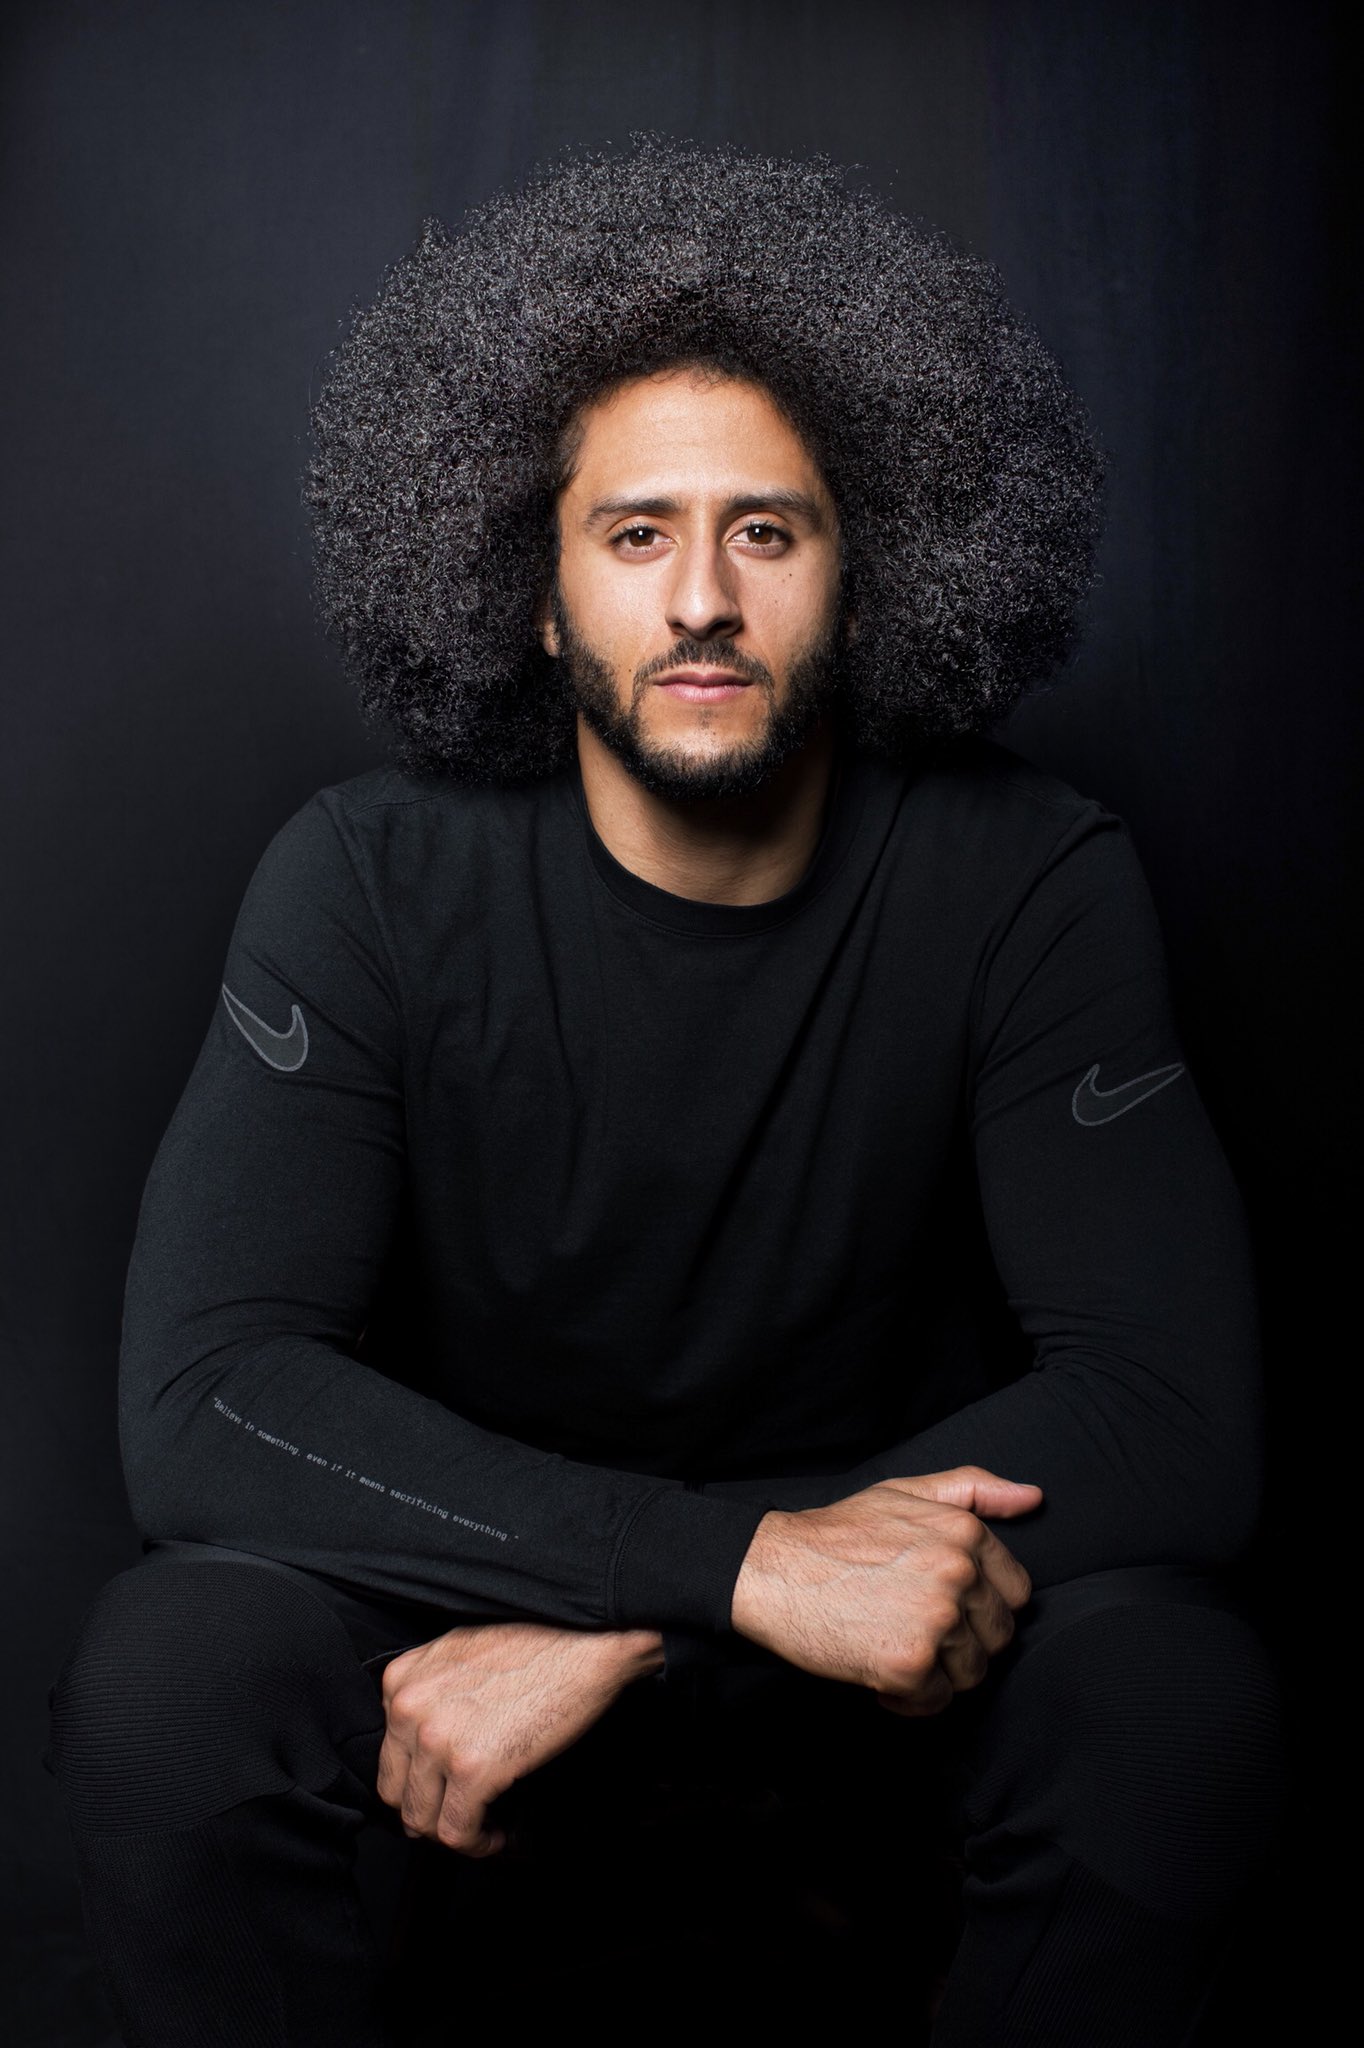 Significado nadie hostilidad Colin Kaepernick on Twitter: "The Nike Icon Tee is Back!  https://t.co/5OdvABSOrW https://t.co/RcgcXW8mSi" / Twitter